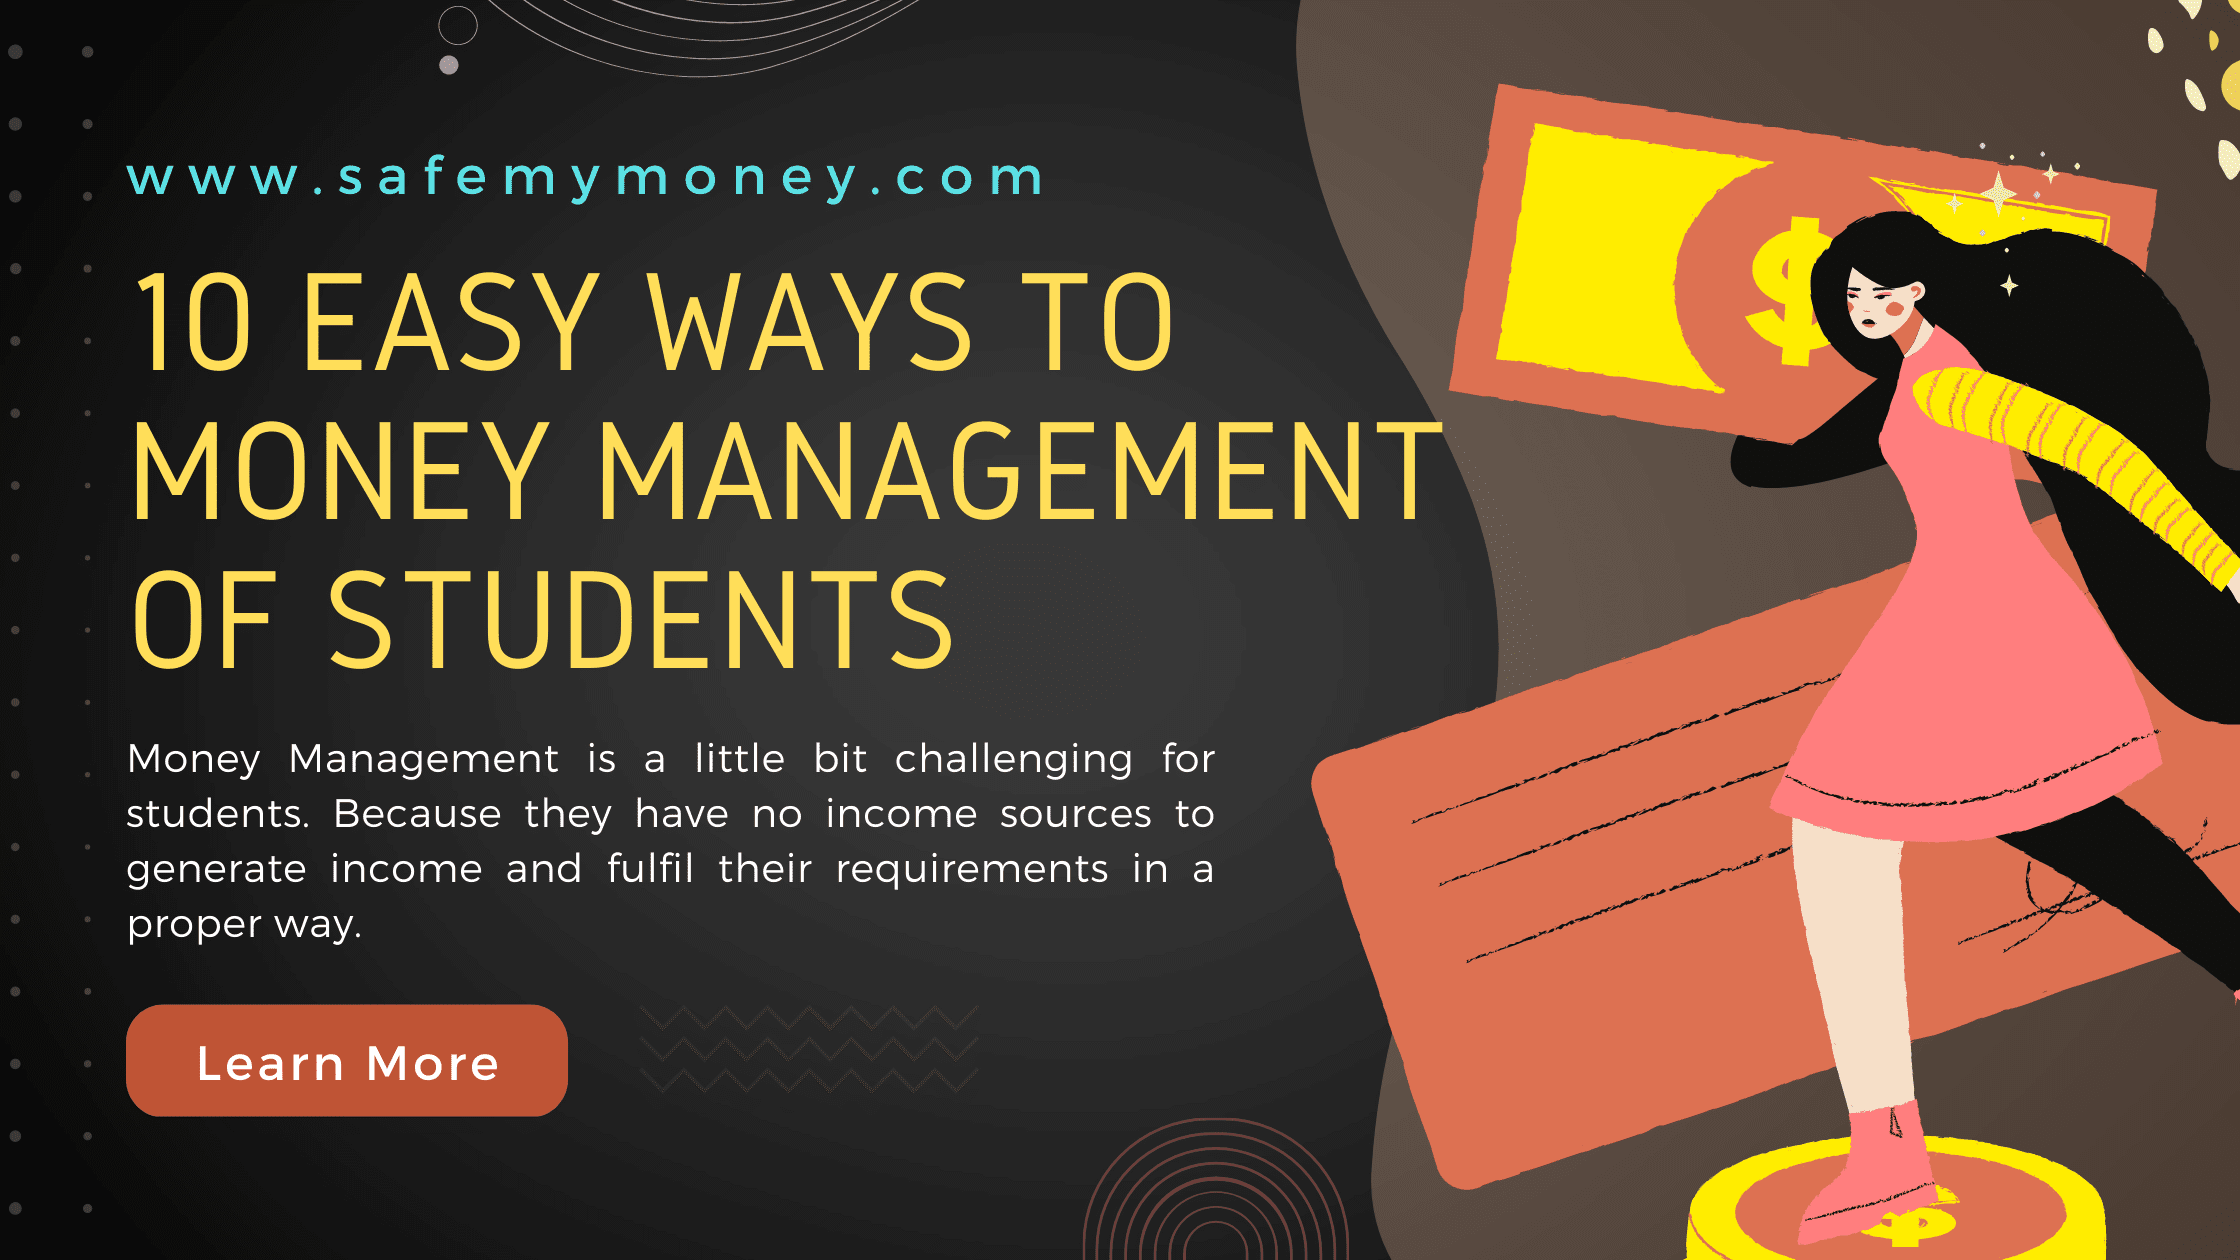 10 Easy Ways To Money Management of Students